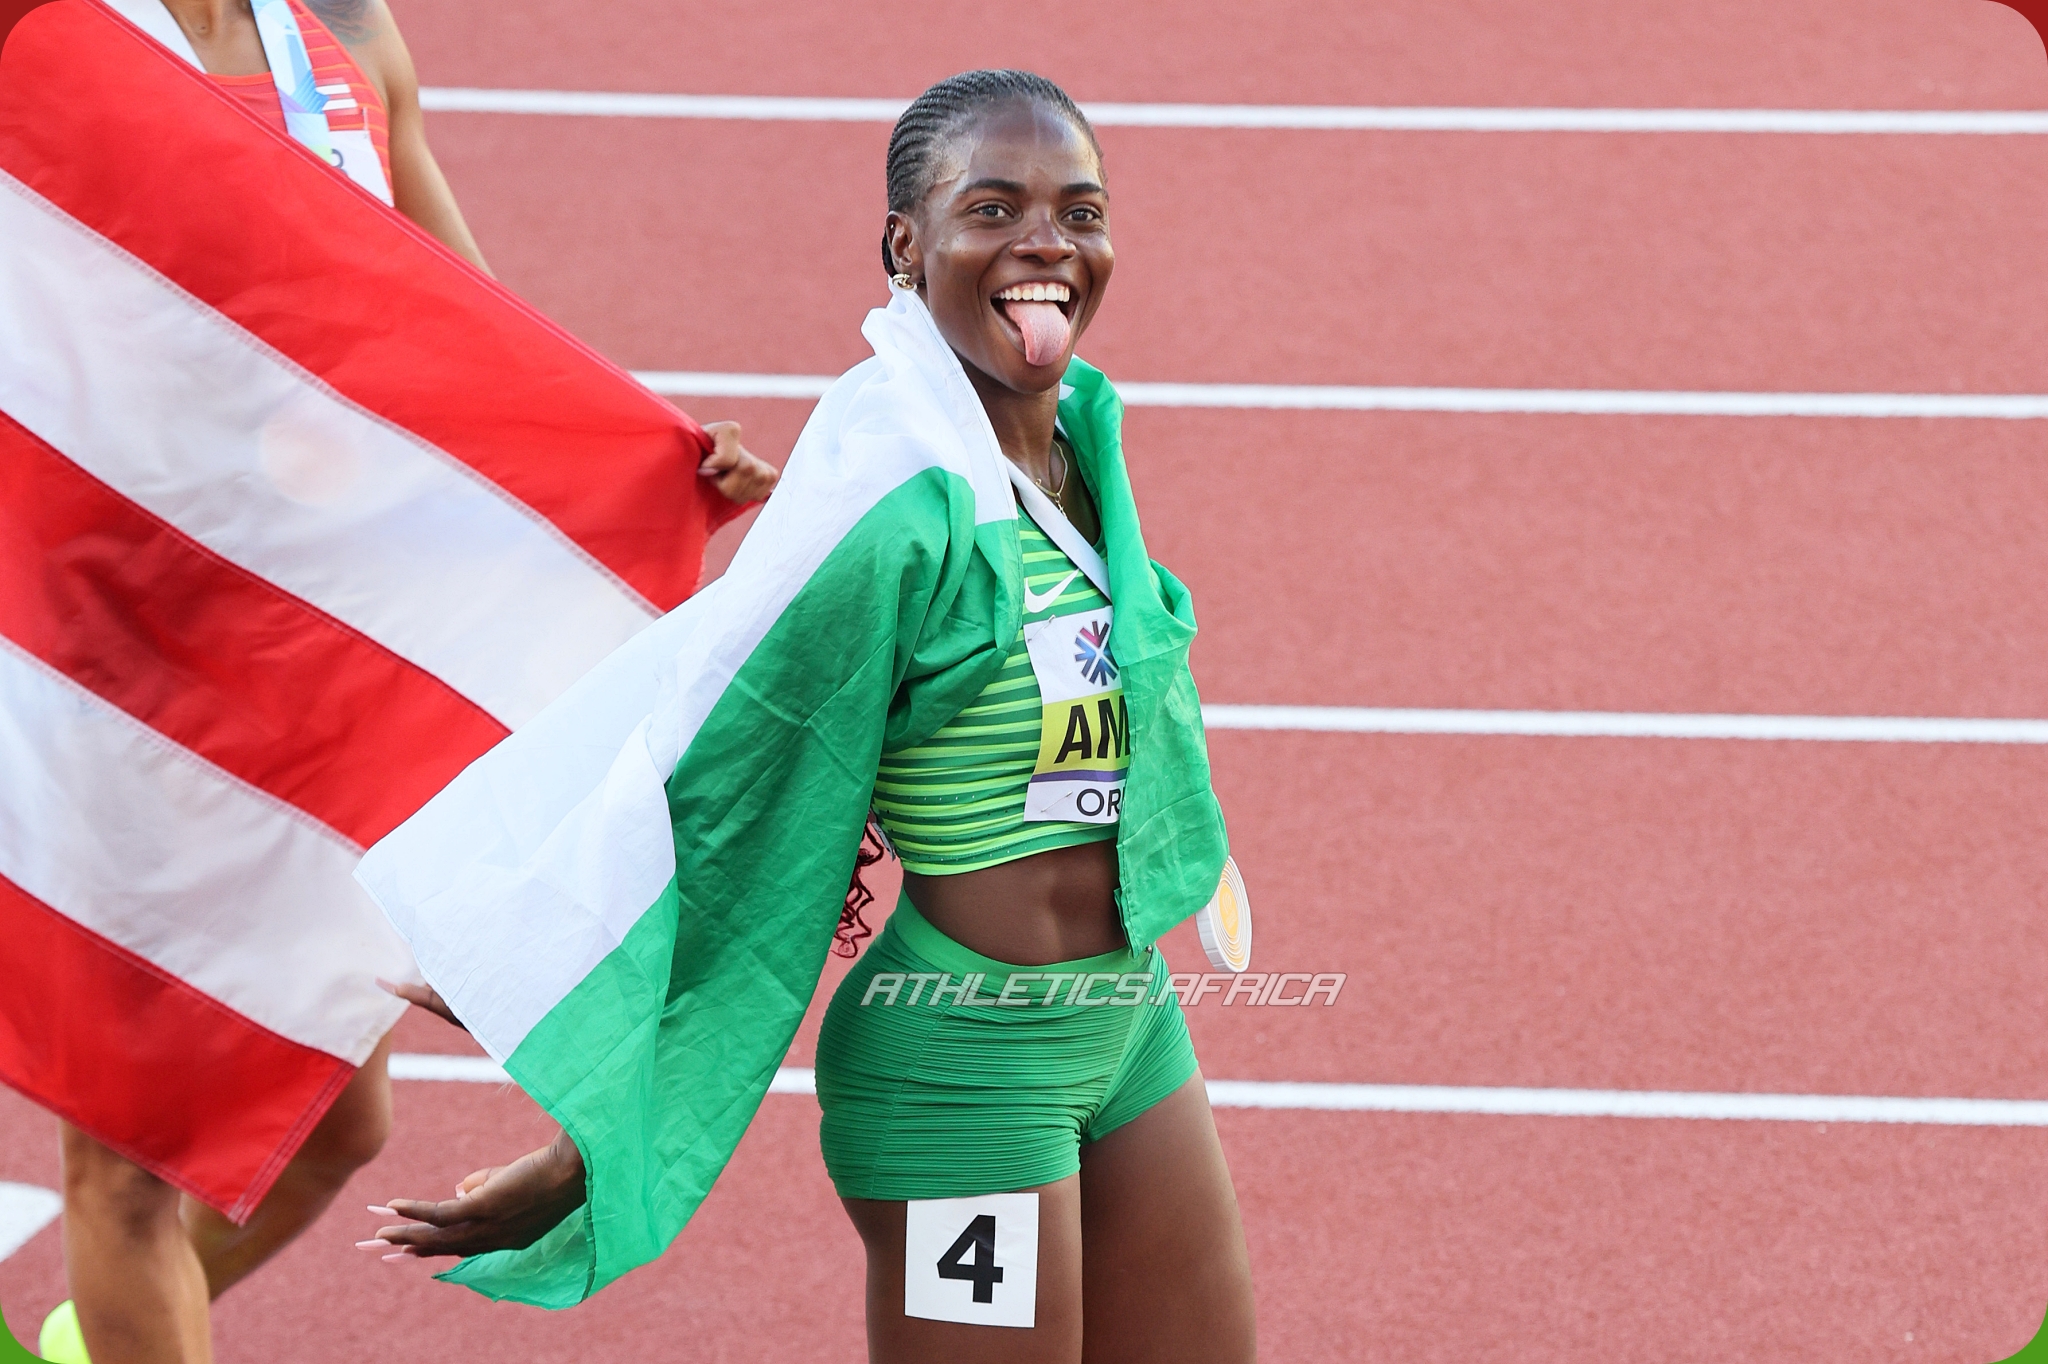 Tobi Amusan of Team Nigeria celebrates after winning gold in the Women's 100m Hurdles Final on day ten of the World Athletics Championships Oregon22 at Hayward Field on July 24, 2022 in Eugene, Oregon. (Photo by Andy Lyons/Getty Images for World Athletics)